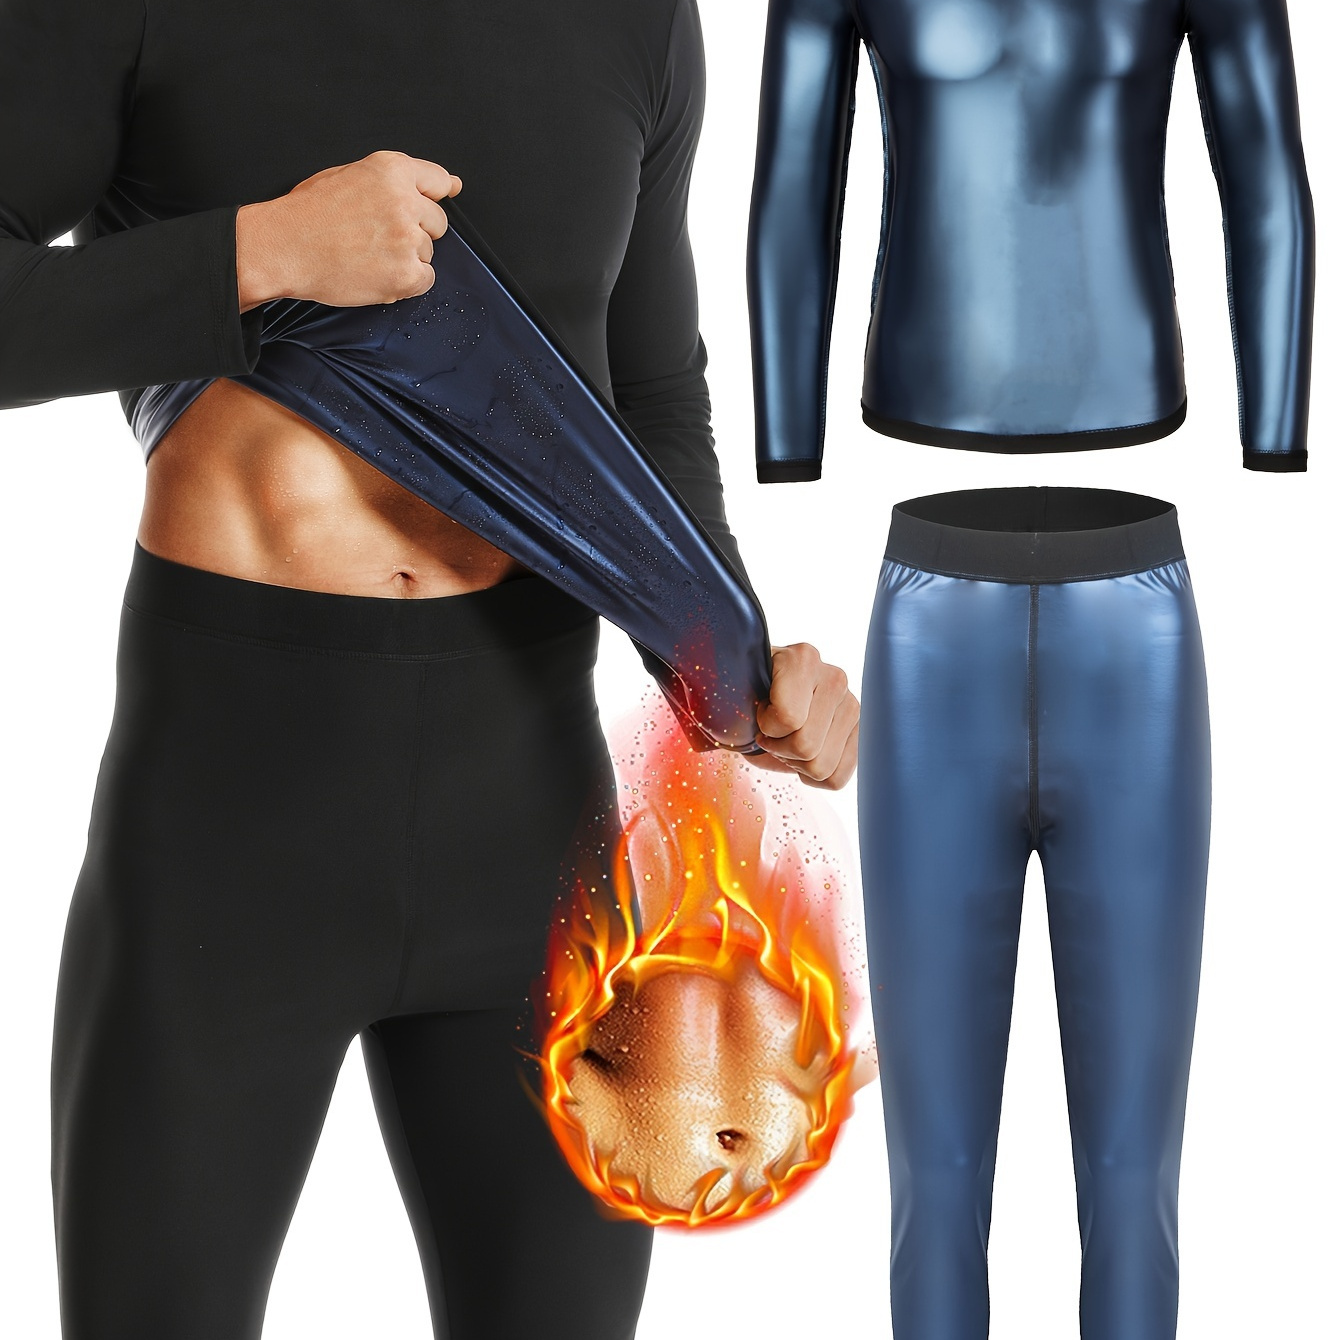 

Men's Sauna Sweat Suit Set - Long Sleeve Compression Top & Compression Pants For Sports, Running, Fitness, Yoga & Training